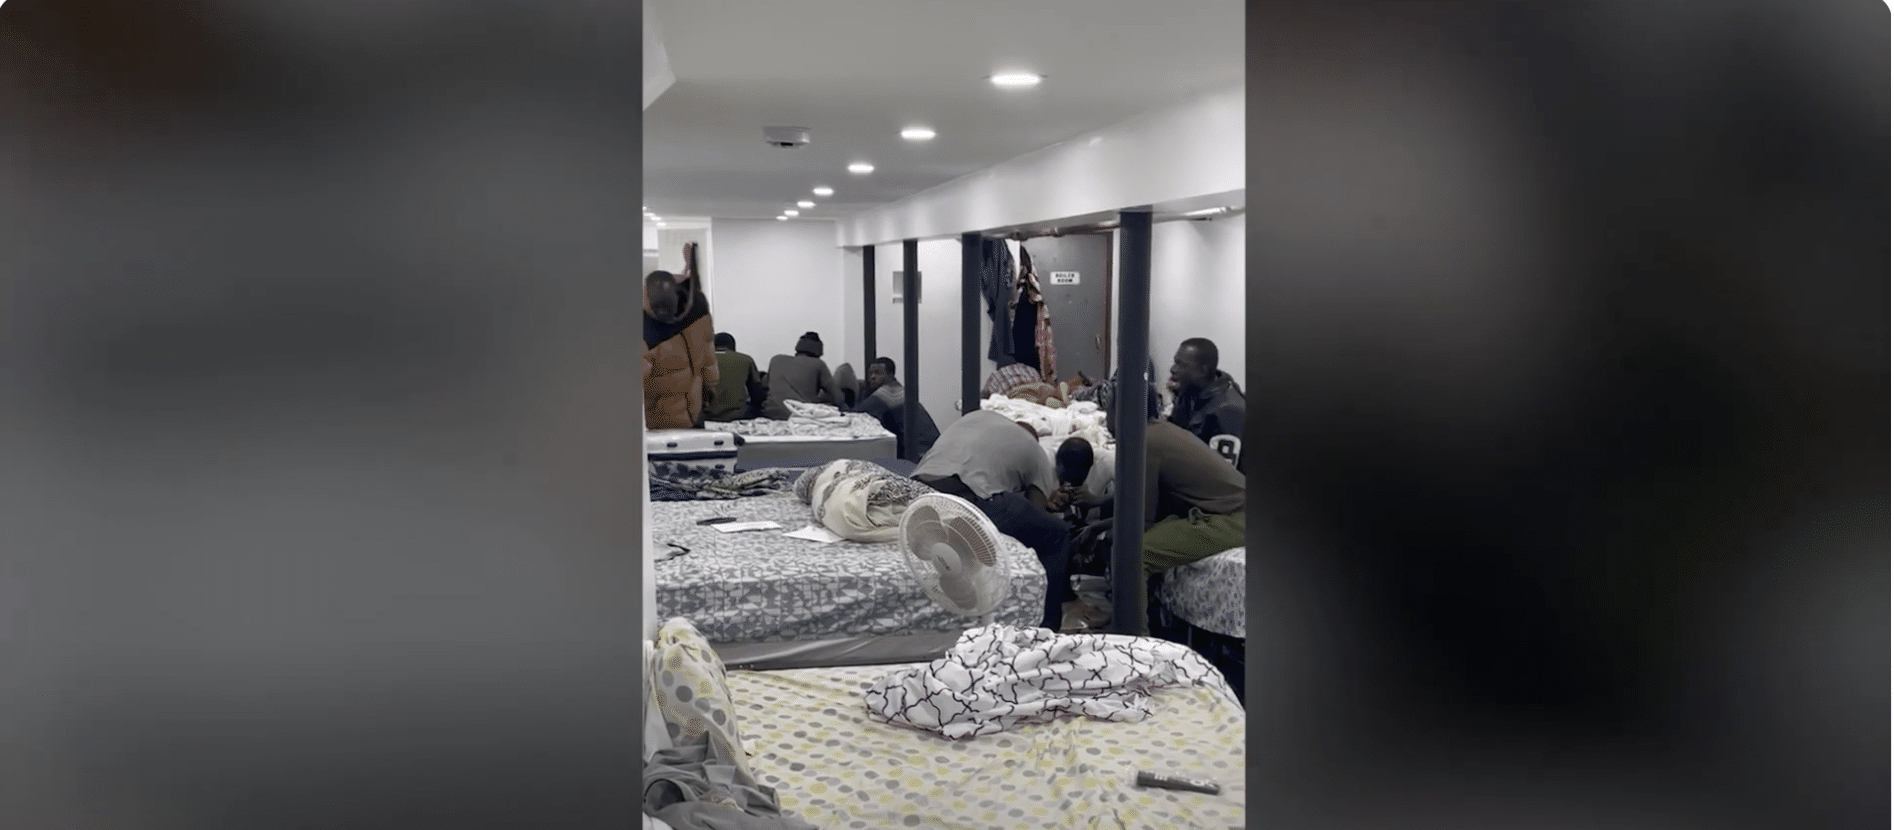 (WATCH) 70 migrants discovered living in cramped NYC basement — sleeping in shifts…